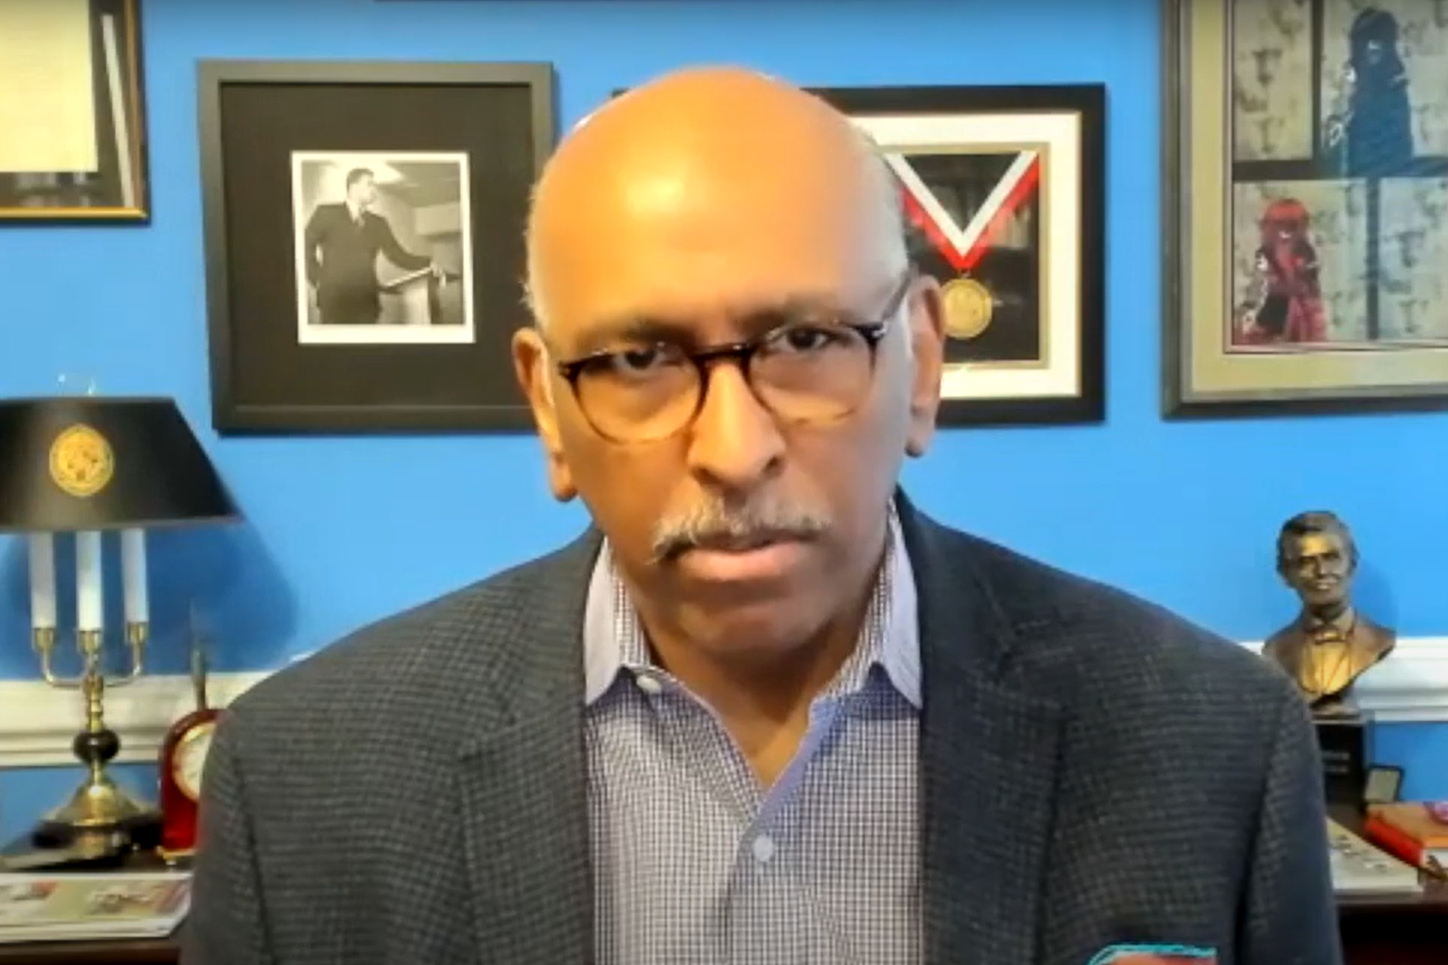 Michael Steele, former Lt. Gov of Maryland and head of the RNC